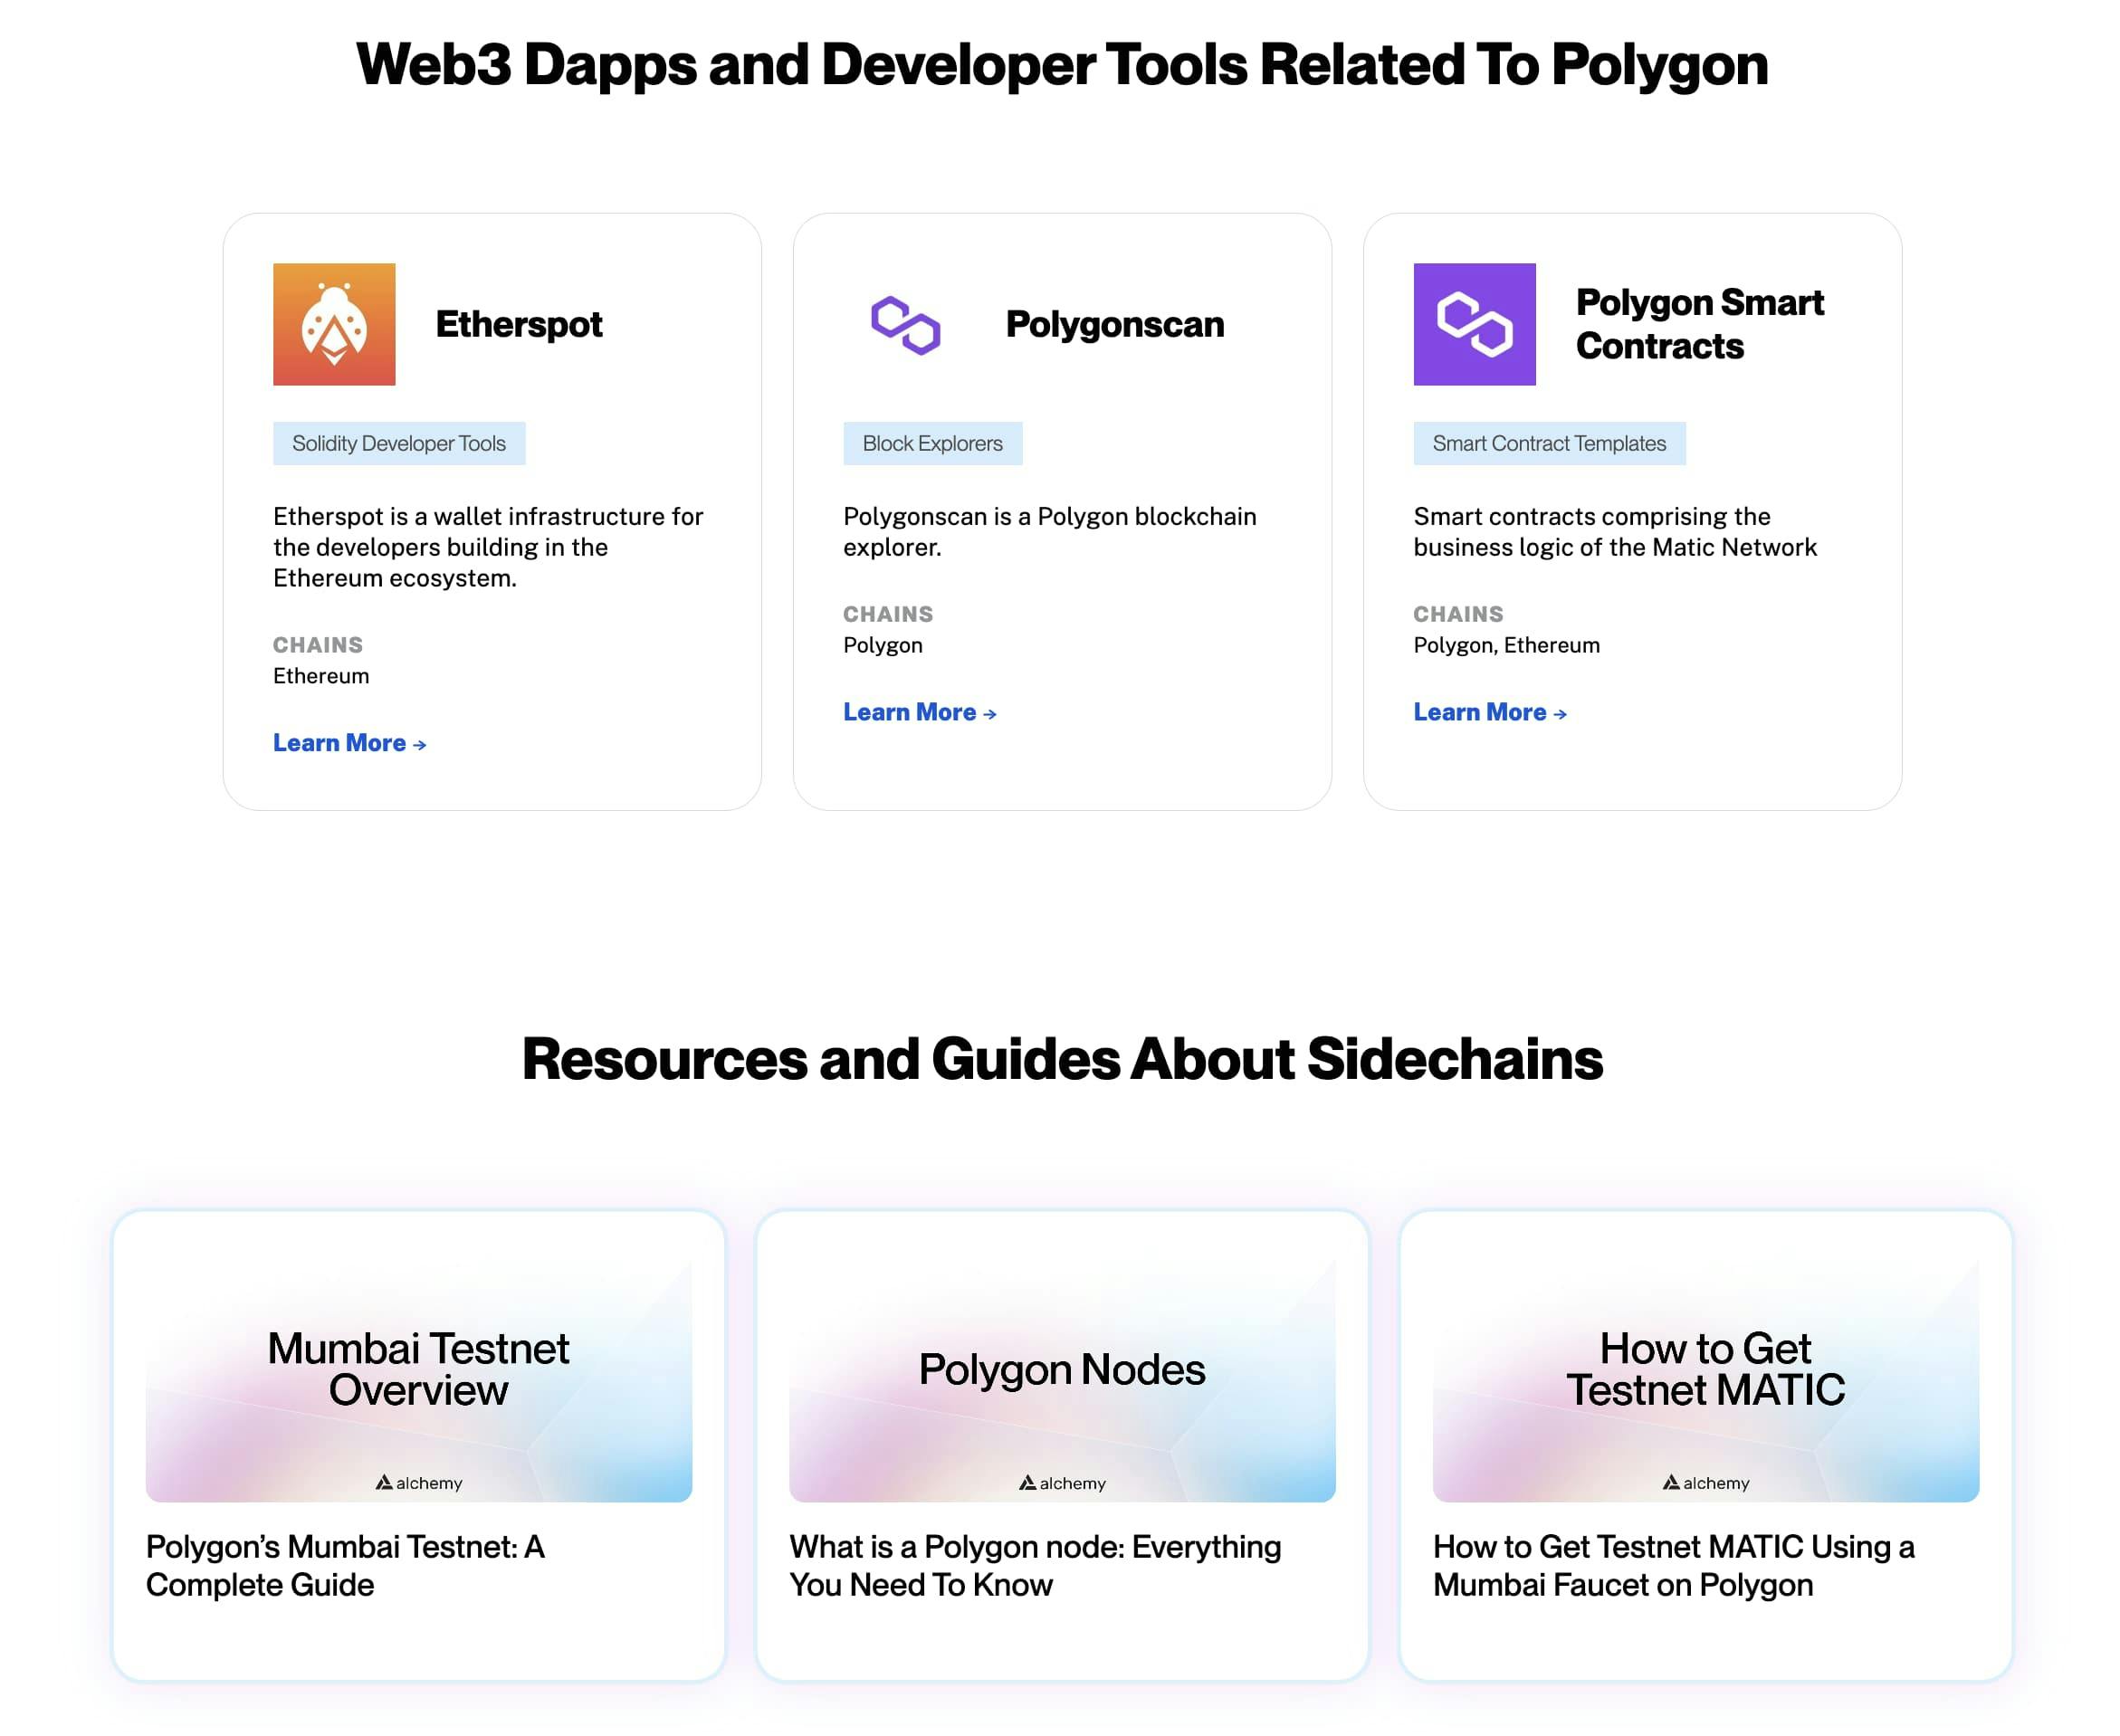 Polygon product page featuring related developer tools and educational resources.